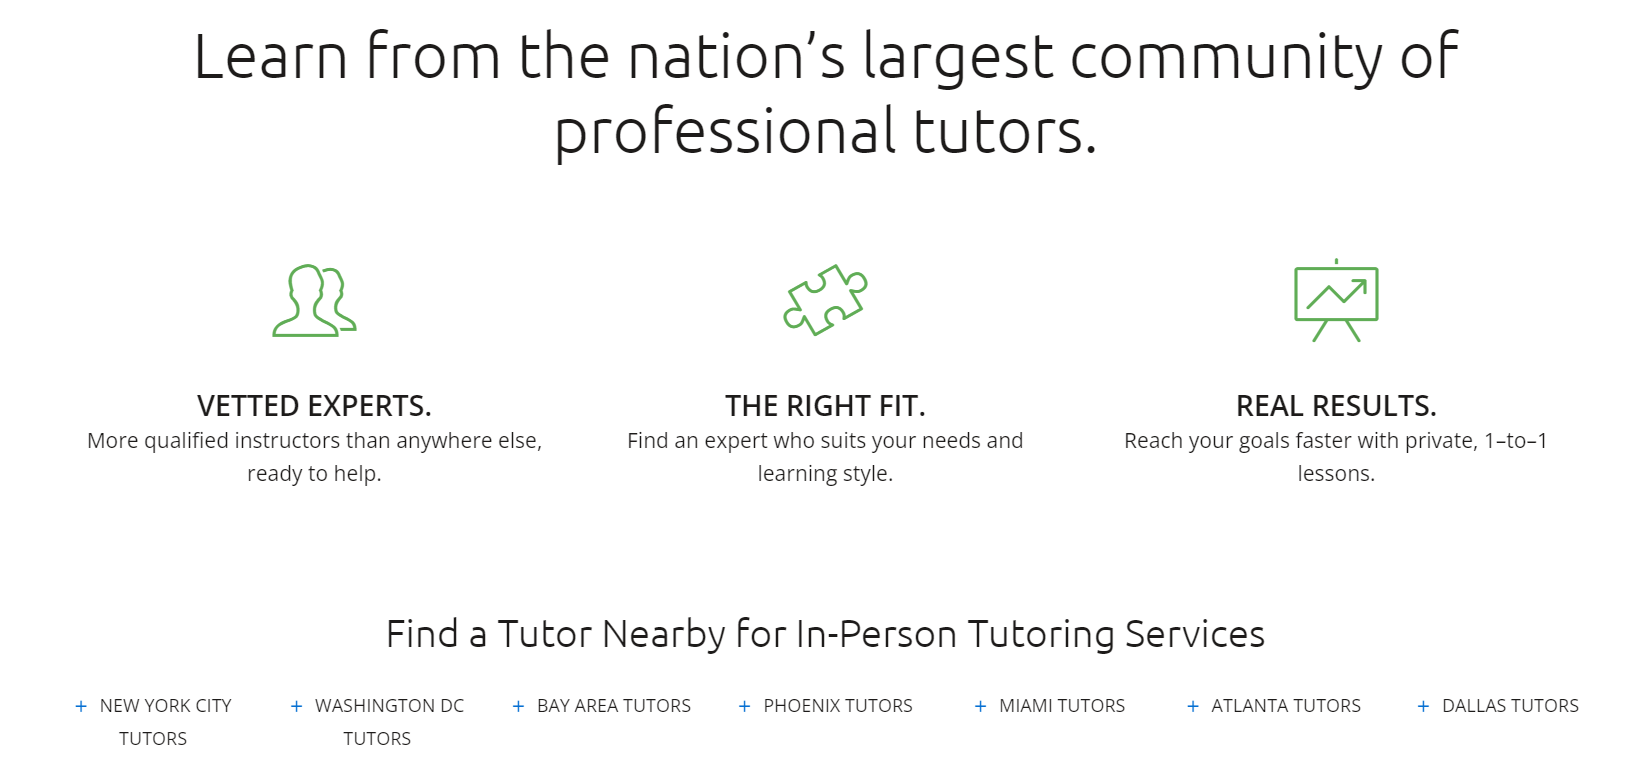 Registered as a Tutor